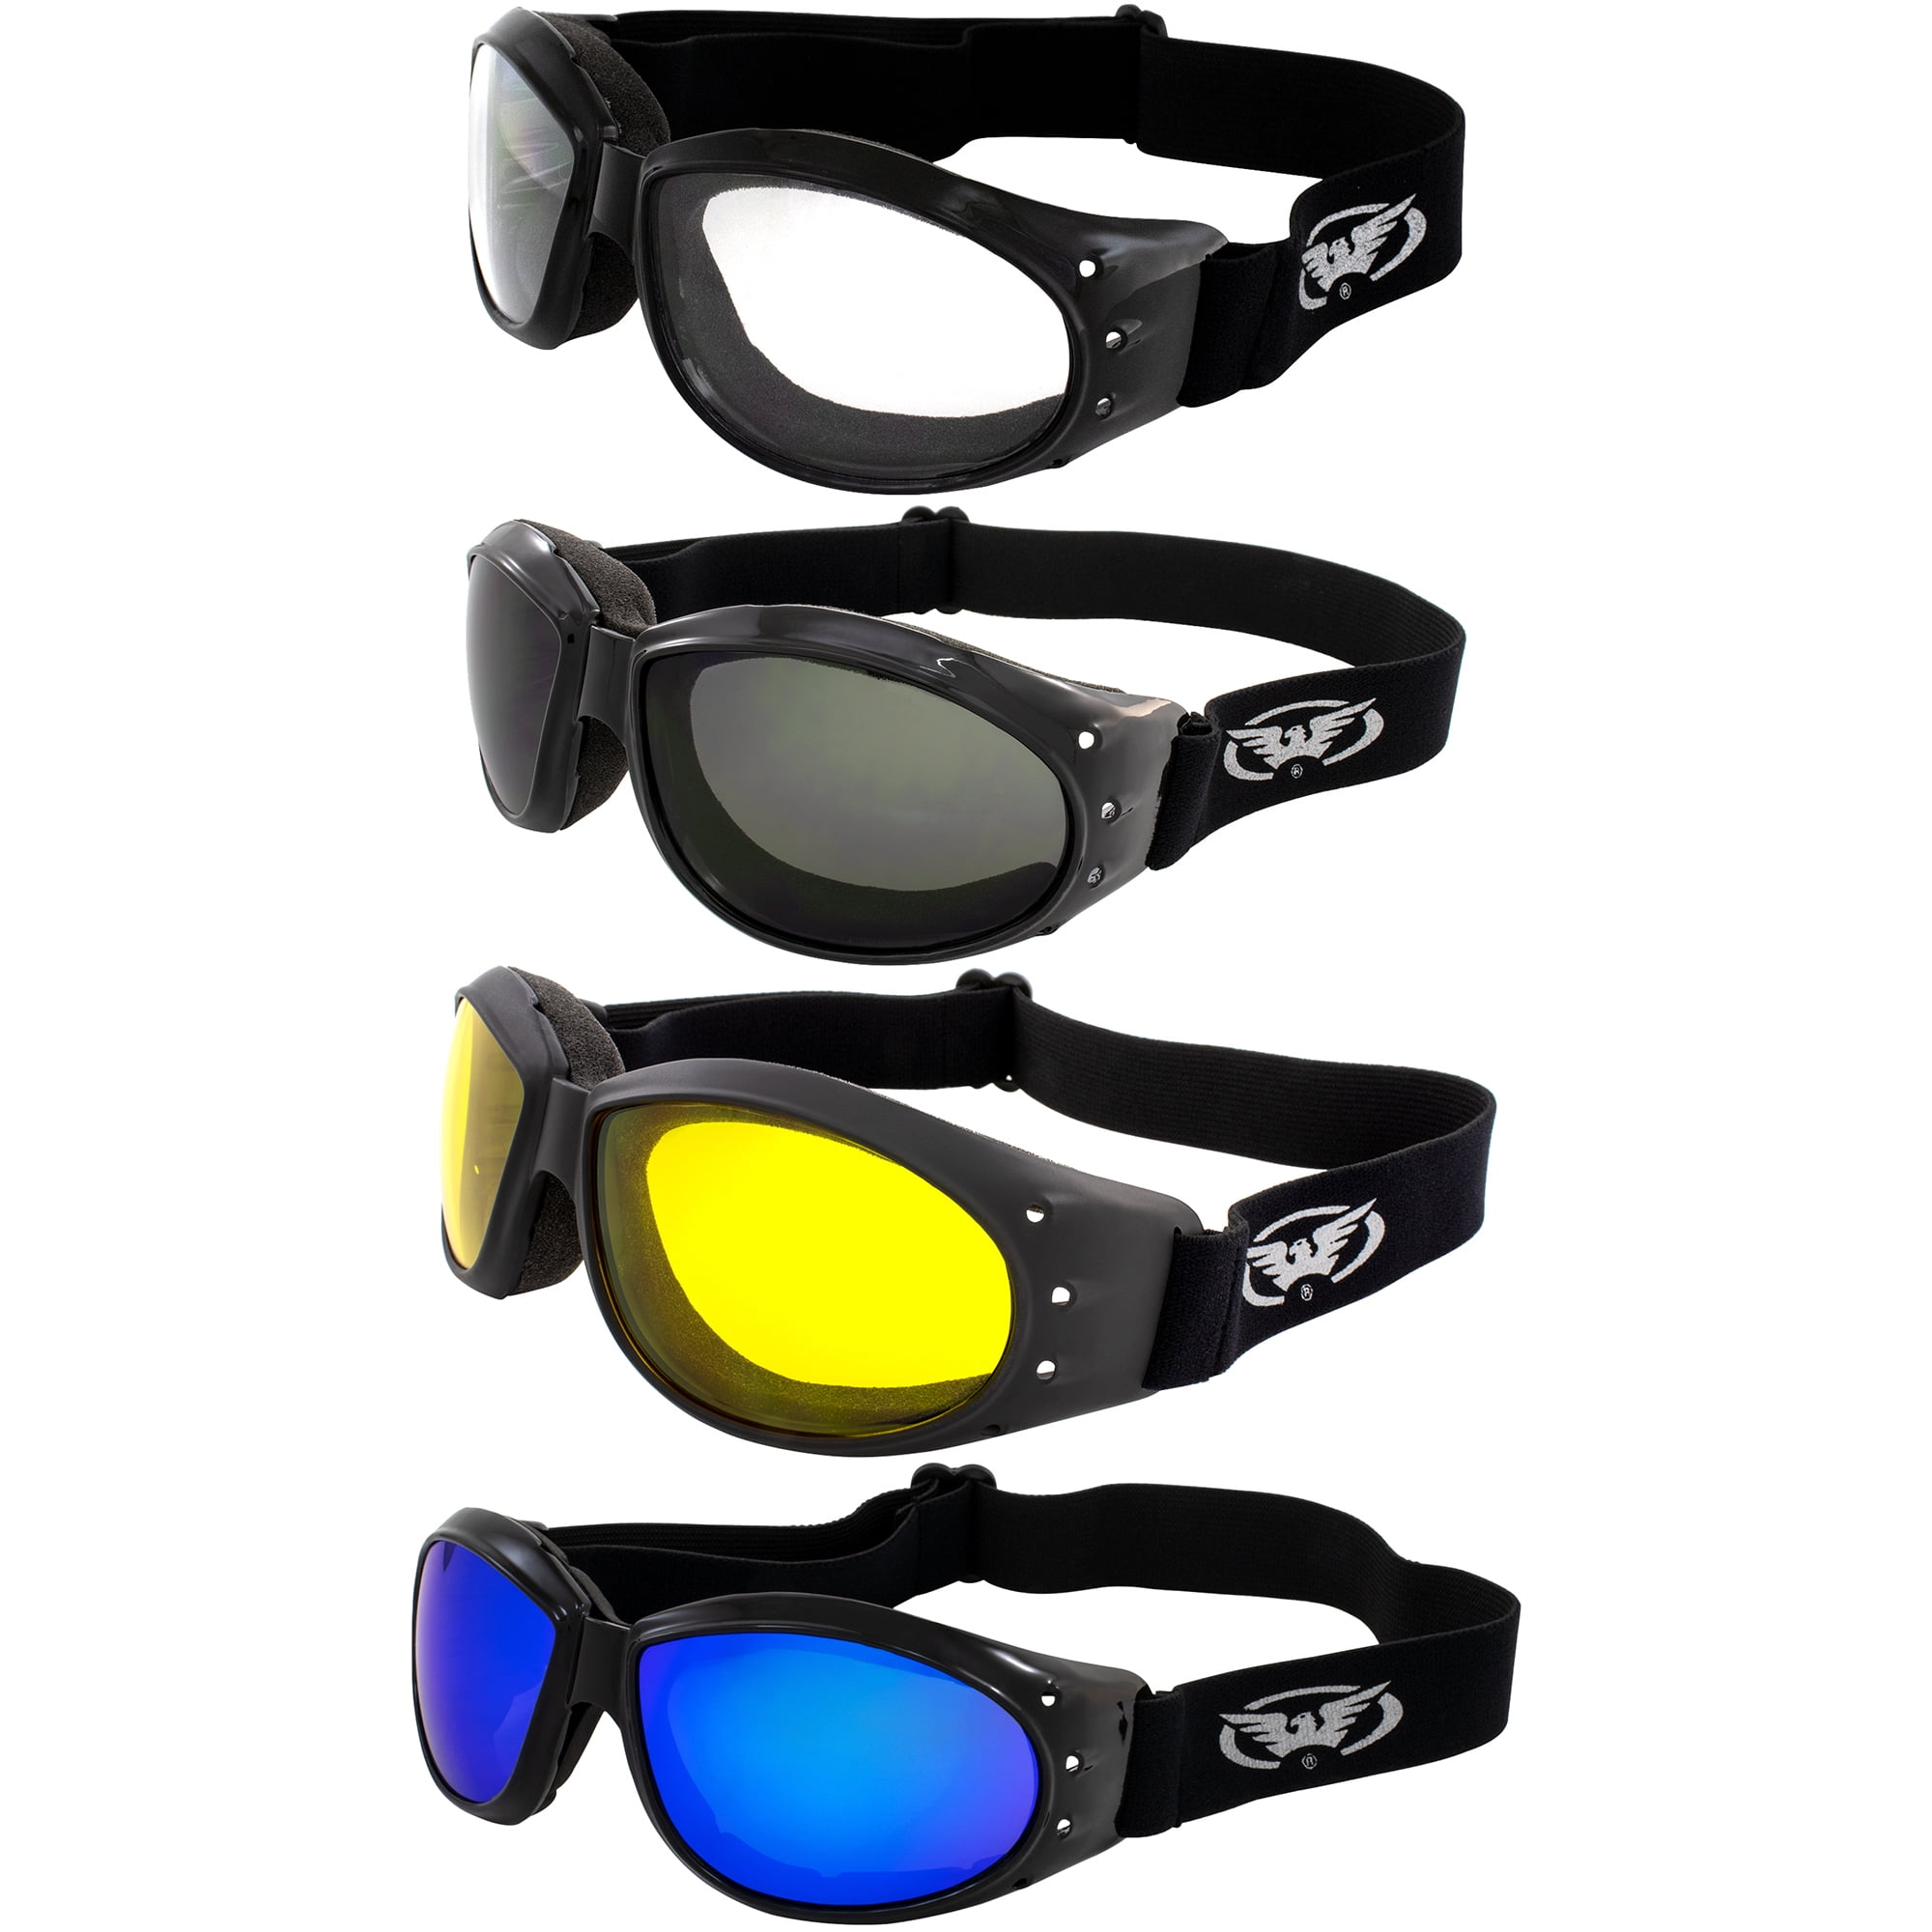 3PCS Windproof Cycling Sunglasses Motorcycle Bicycle Protective Riding Glasses 